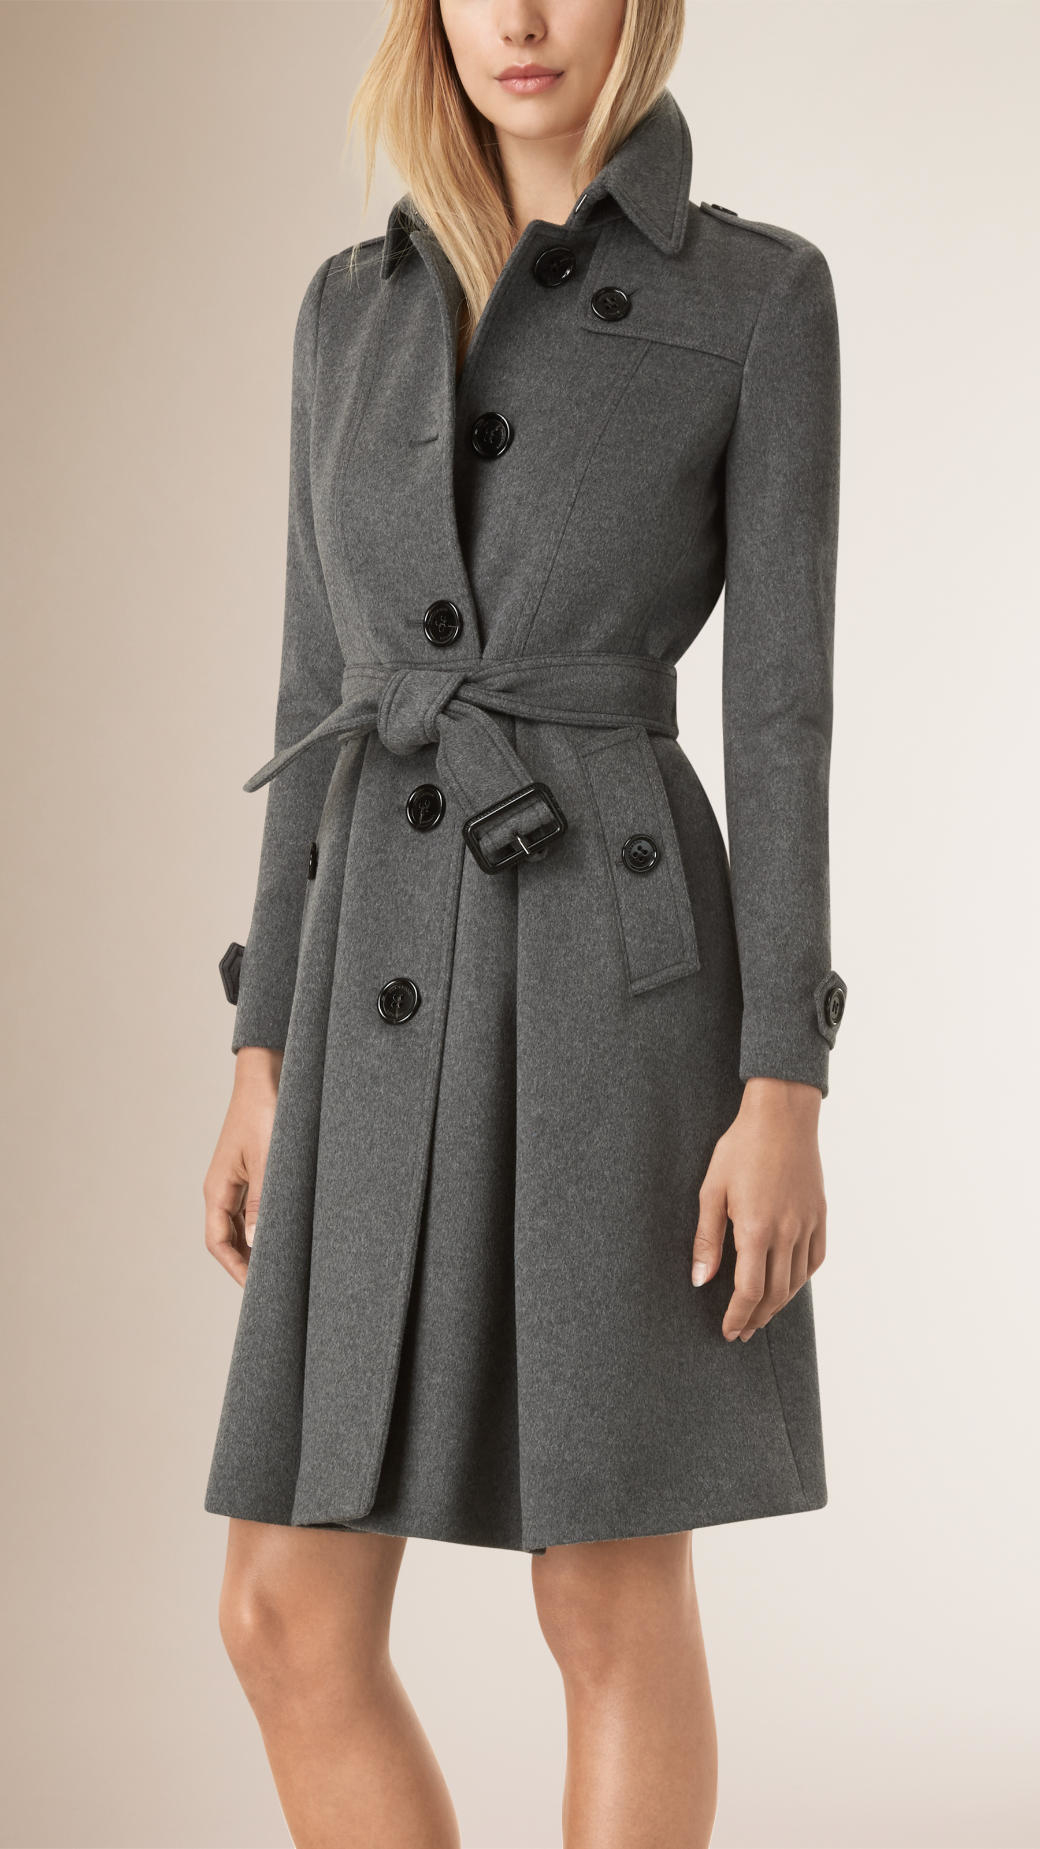 Lyst - Burberry Skirted Wool Cashmere Coat in Gray